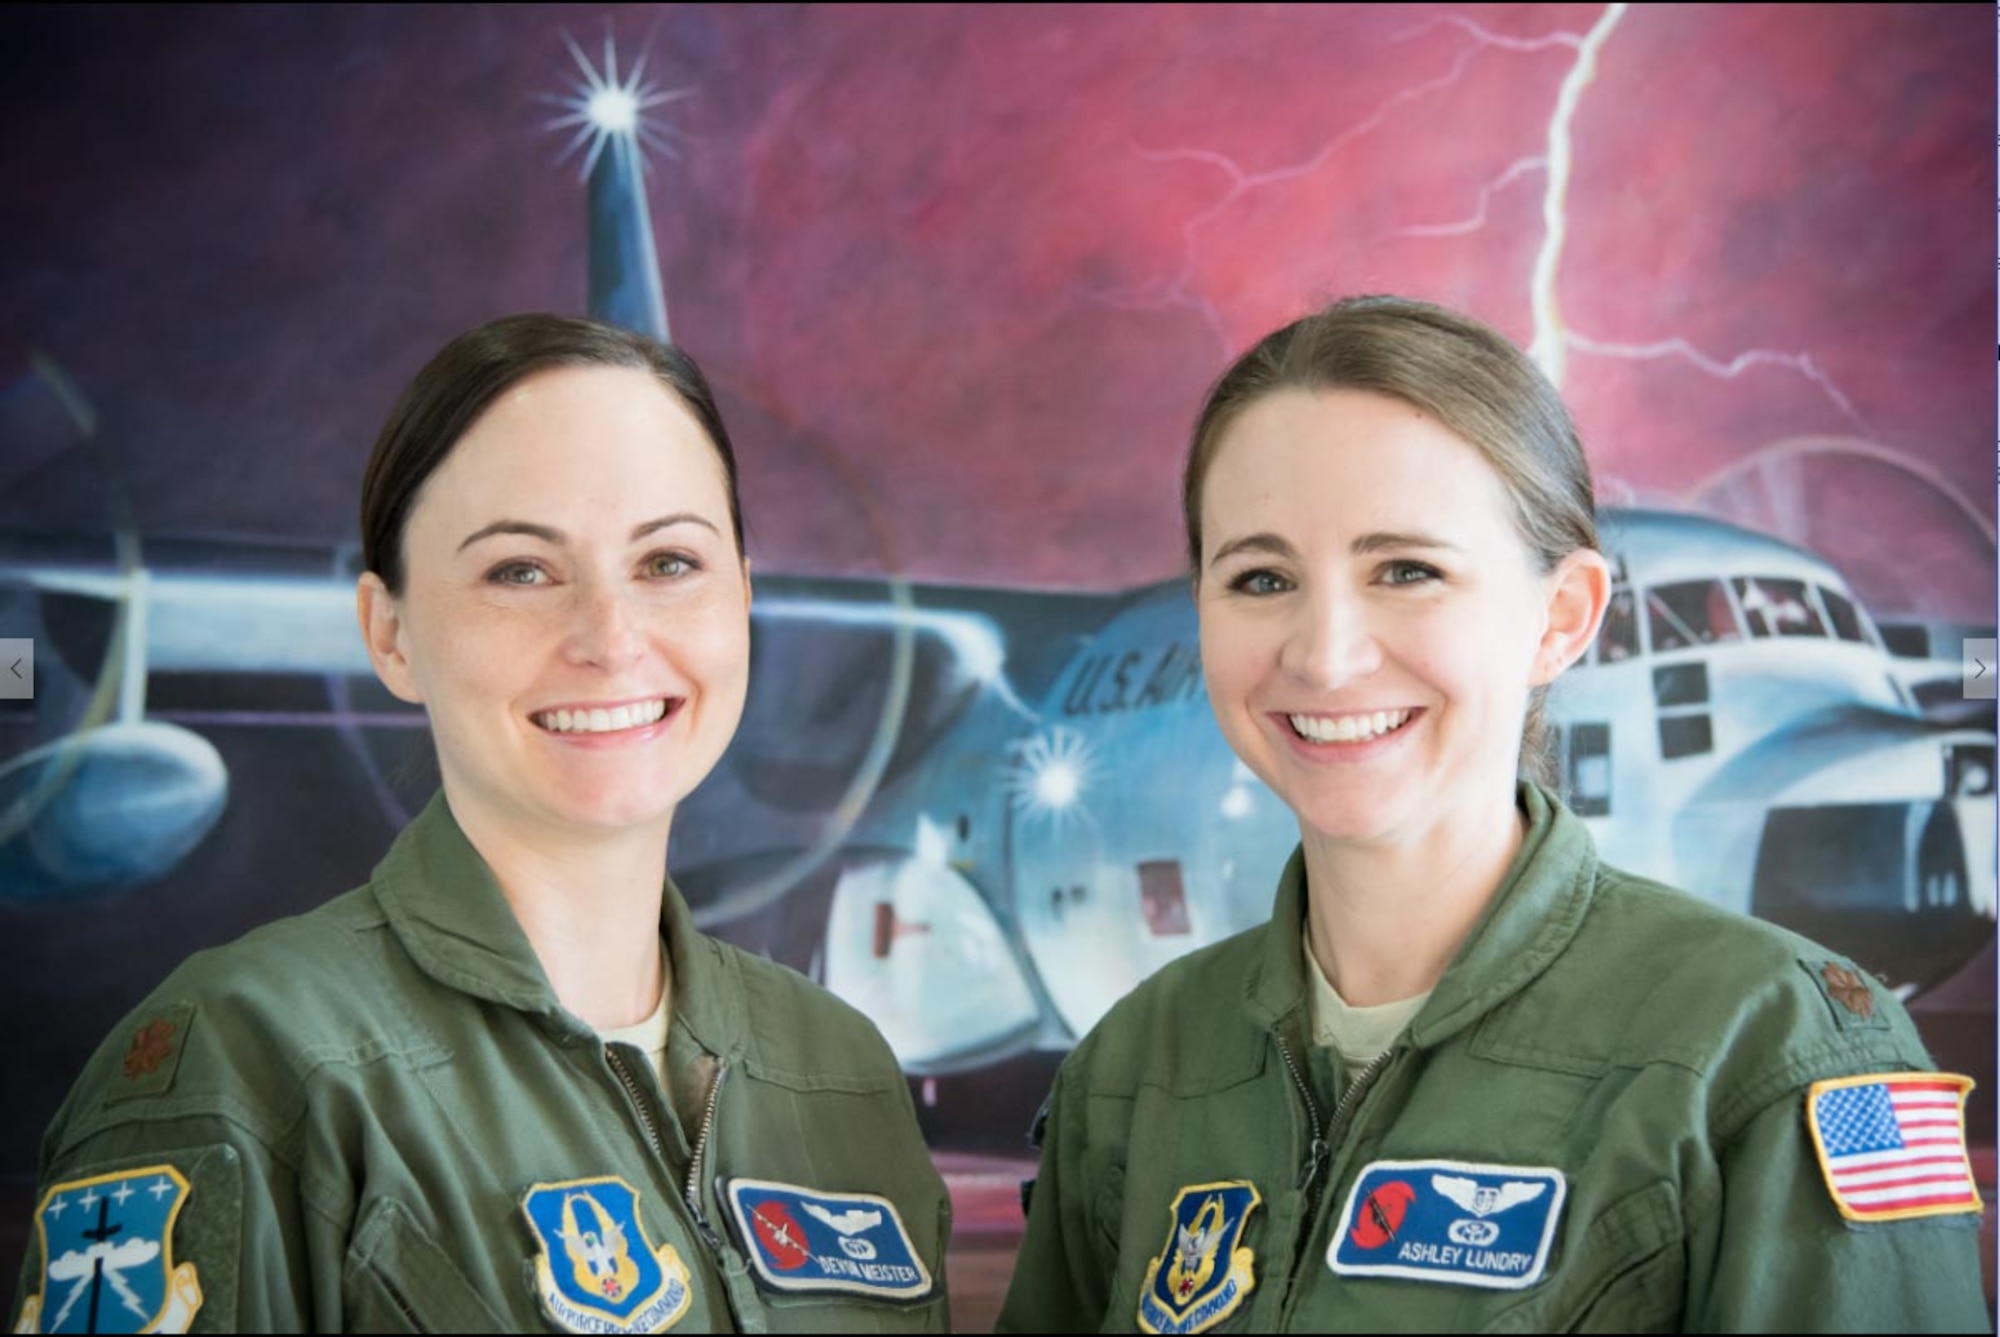 Maj. Devon Meister, pilot, and Maj. Ashley Lundry, aerial reconnaissance weather officer, are members of the 53rd Weather Reconnaissance Squadron, referred to as the Hurricane Hunters, which is a unit in the Air Force Reserve's 403rd Wing at Keesler Air Force Base, Mississippi. (U.S. Air Force photo by Staff Sgt. Heather Heiney)